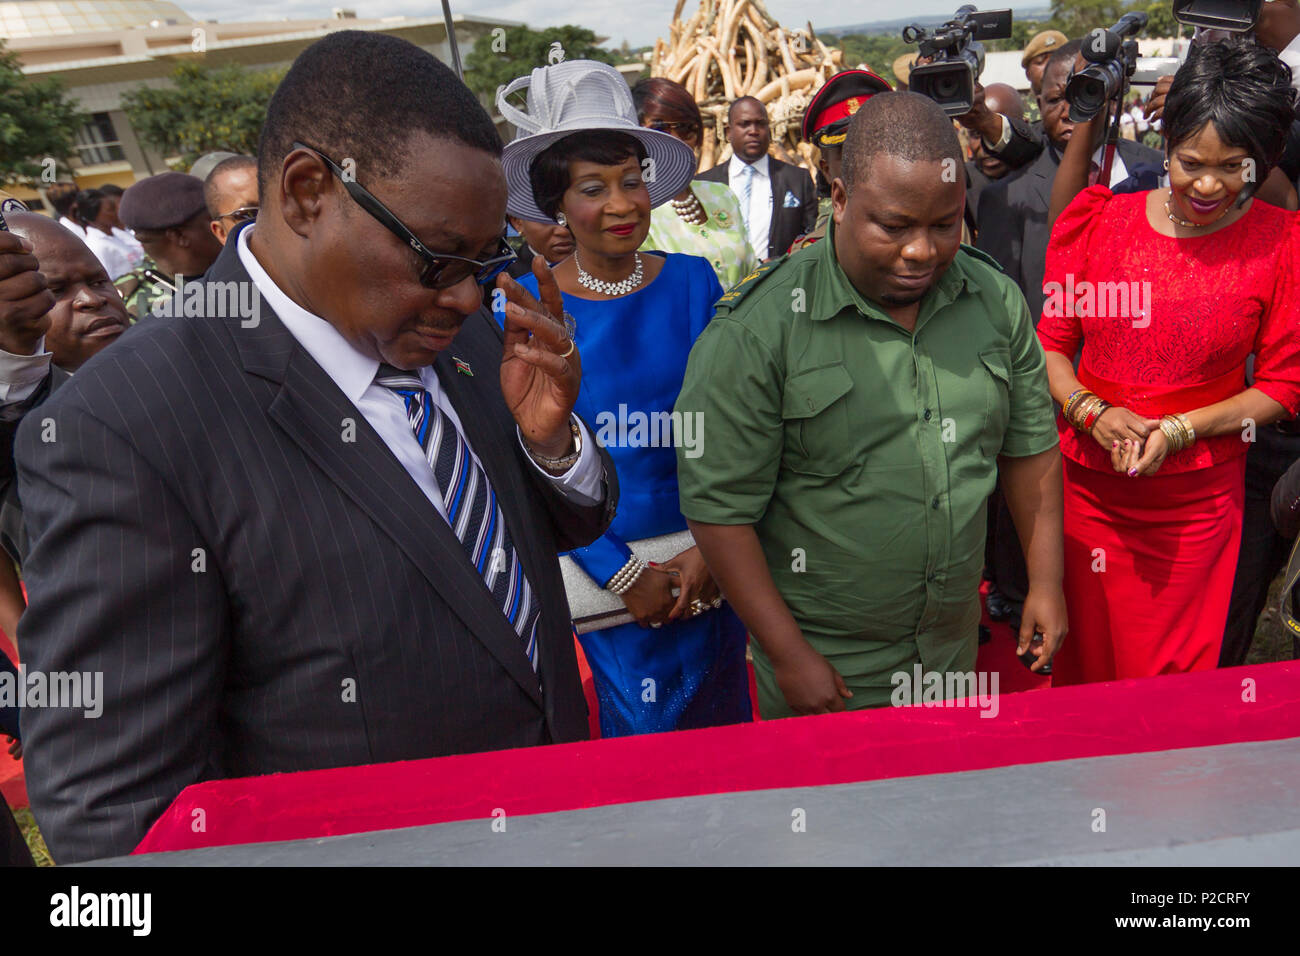 President Peter Mutharika oversees Ivory burning ceremony scheduled at Lilongwe's Parliament grounds in Malawi at which no ivory was burned. Stock Photo